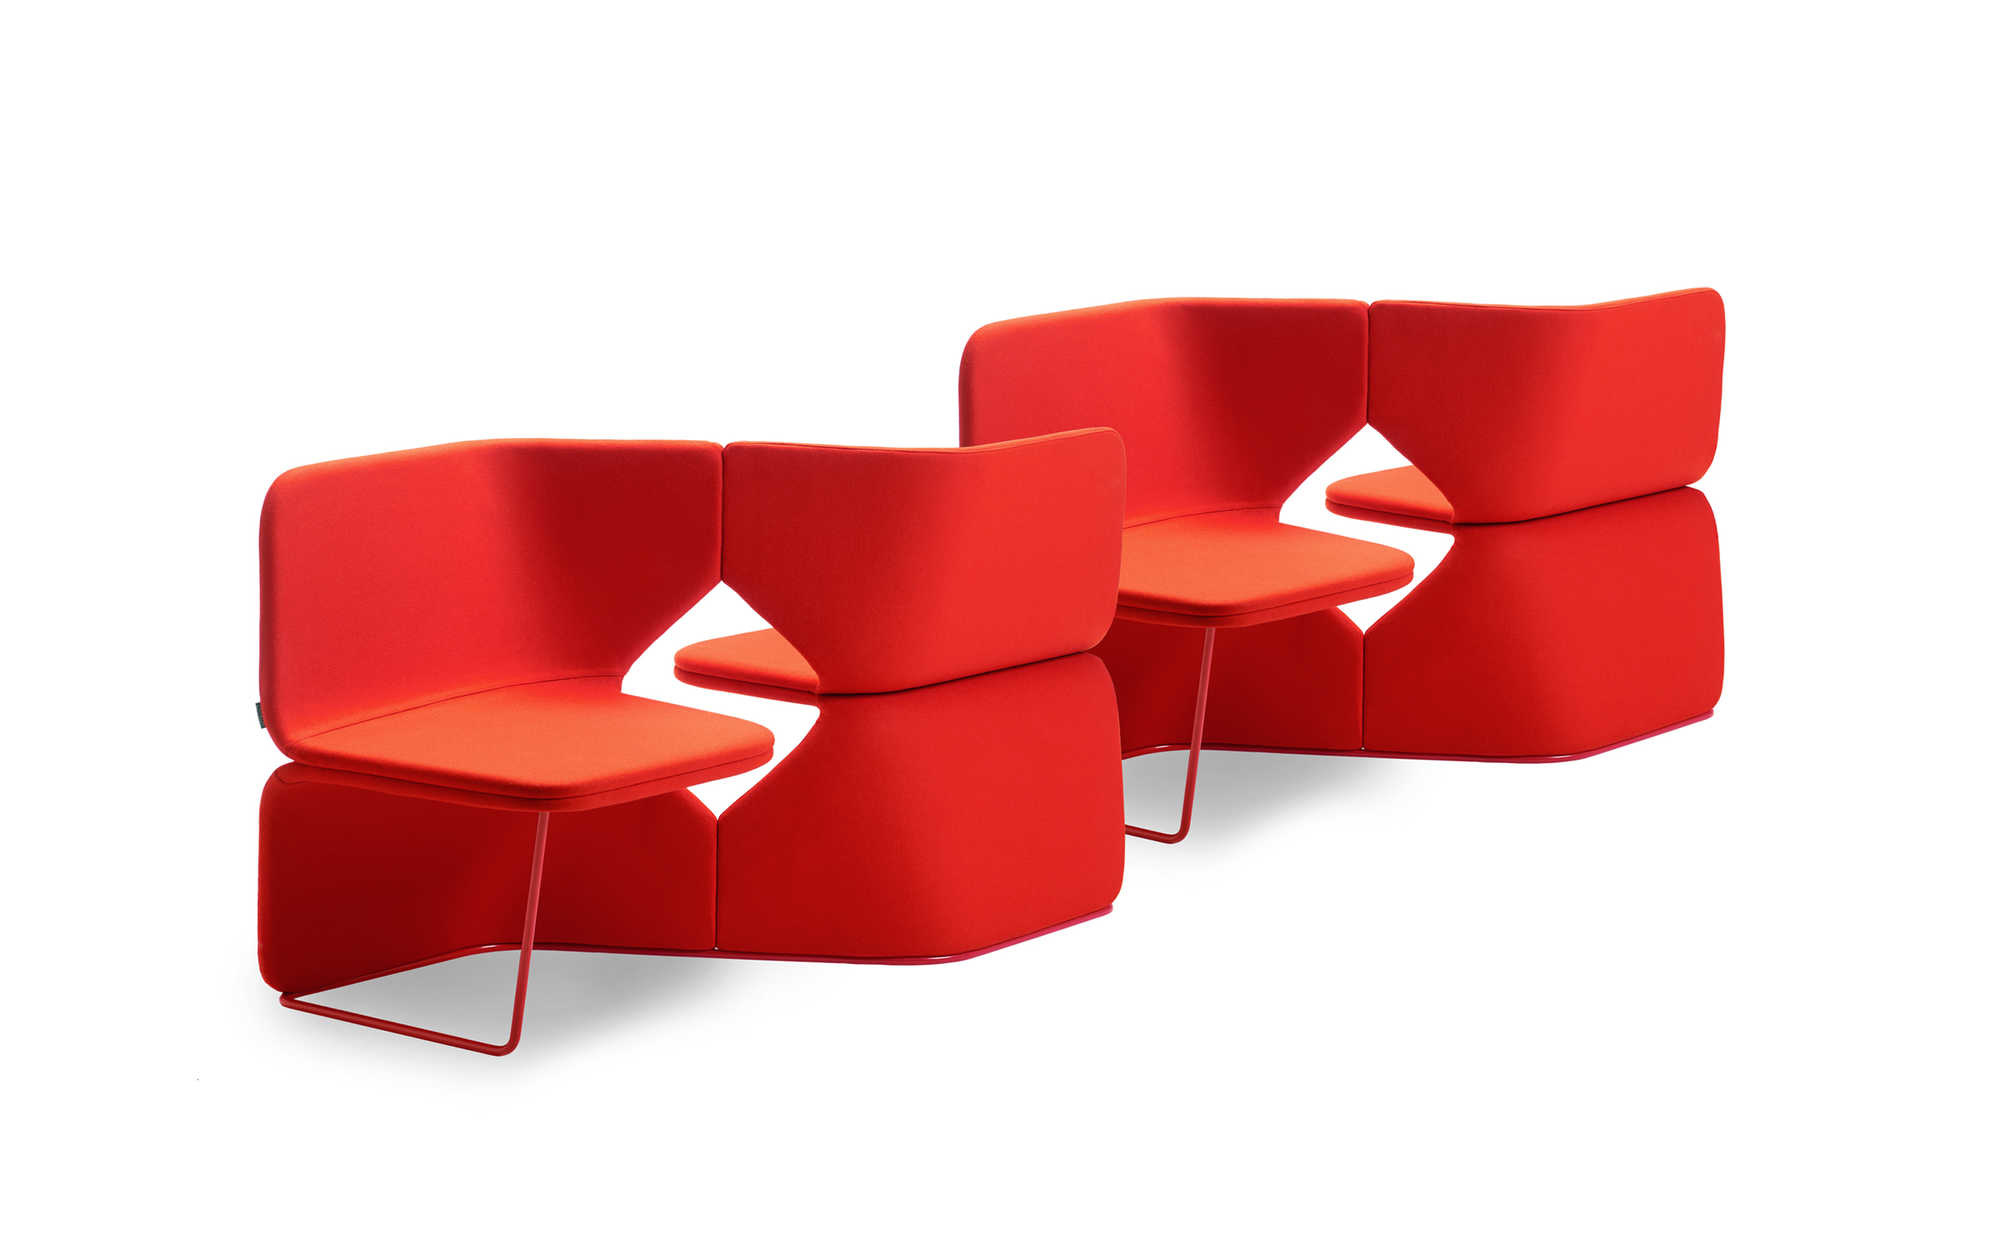 New seating system 'Studio' for Offecct launched at Salone del Mobile, Milan